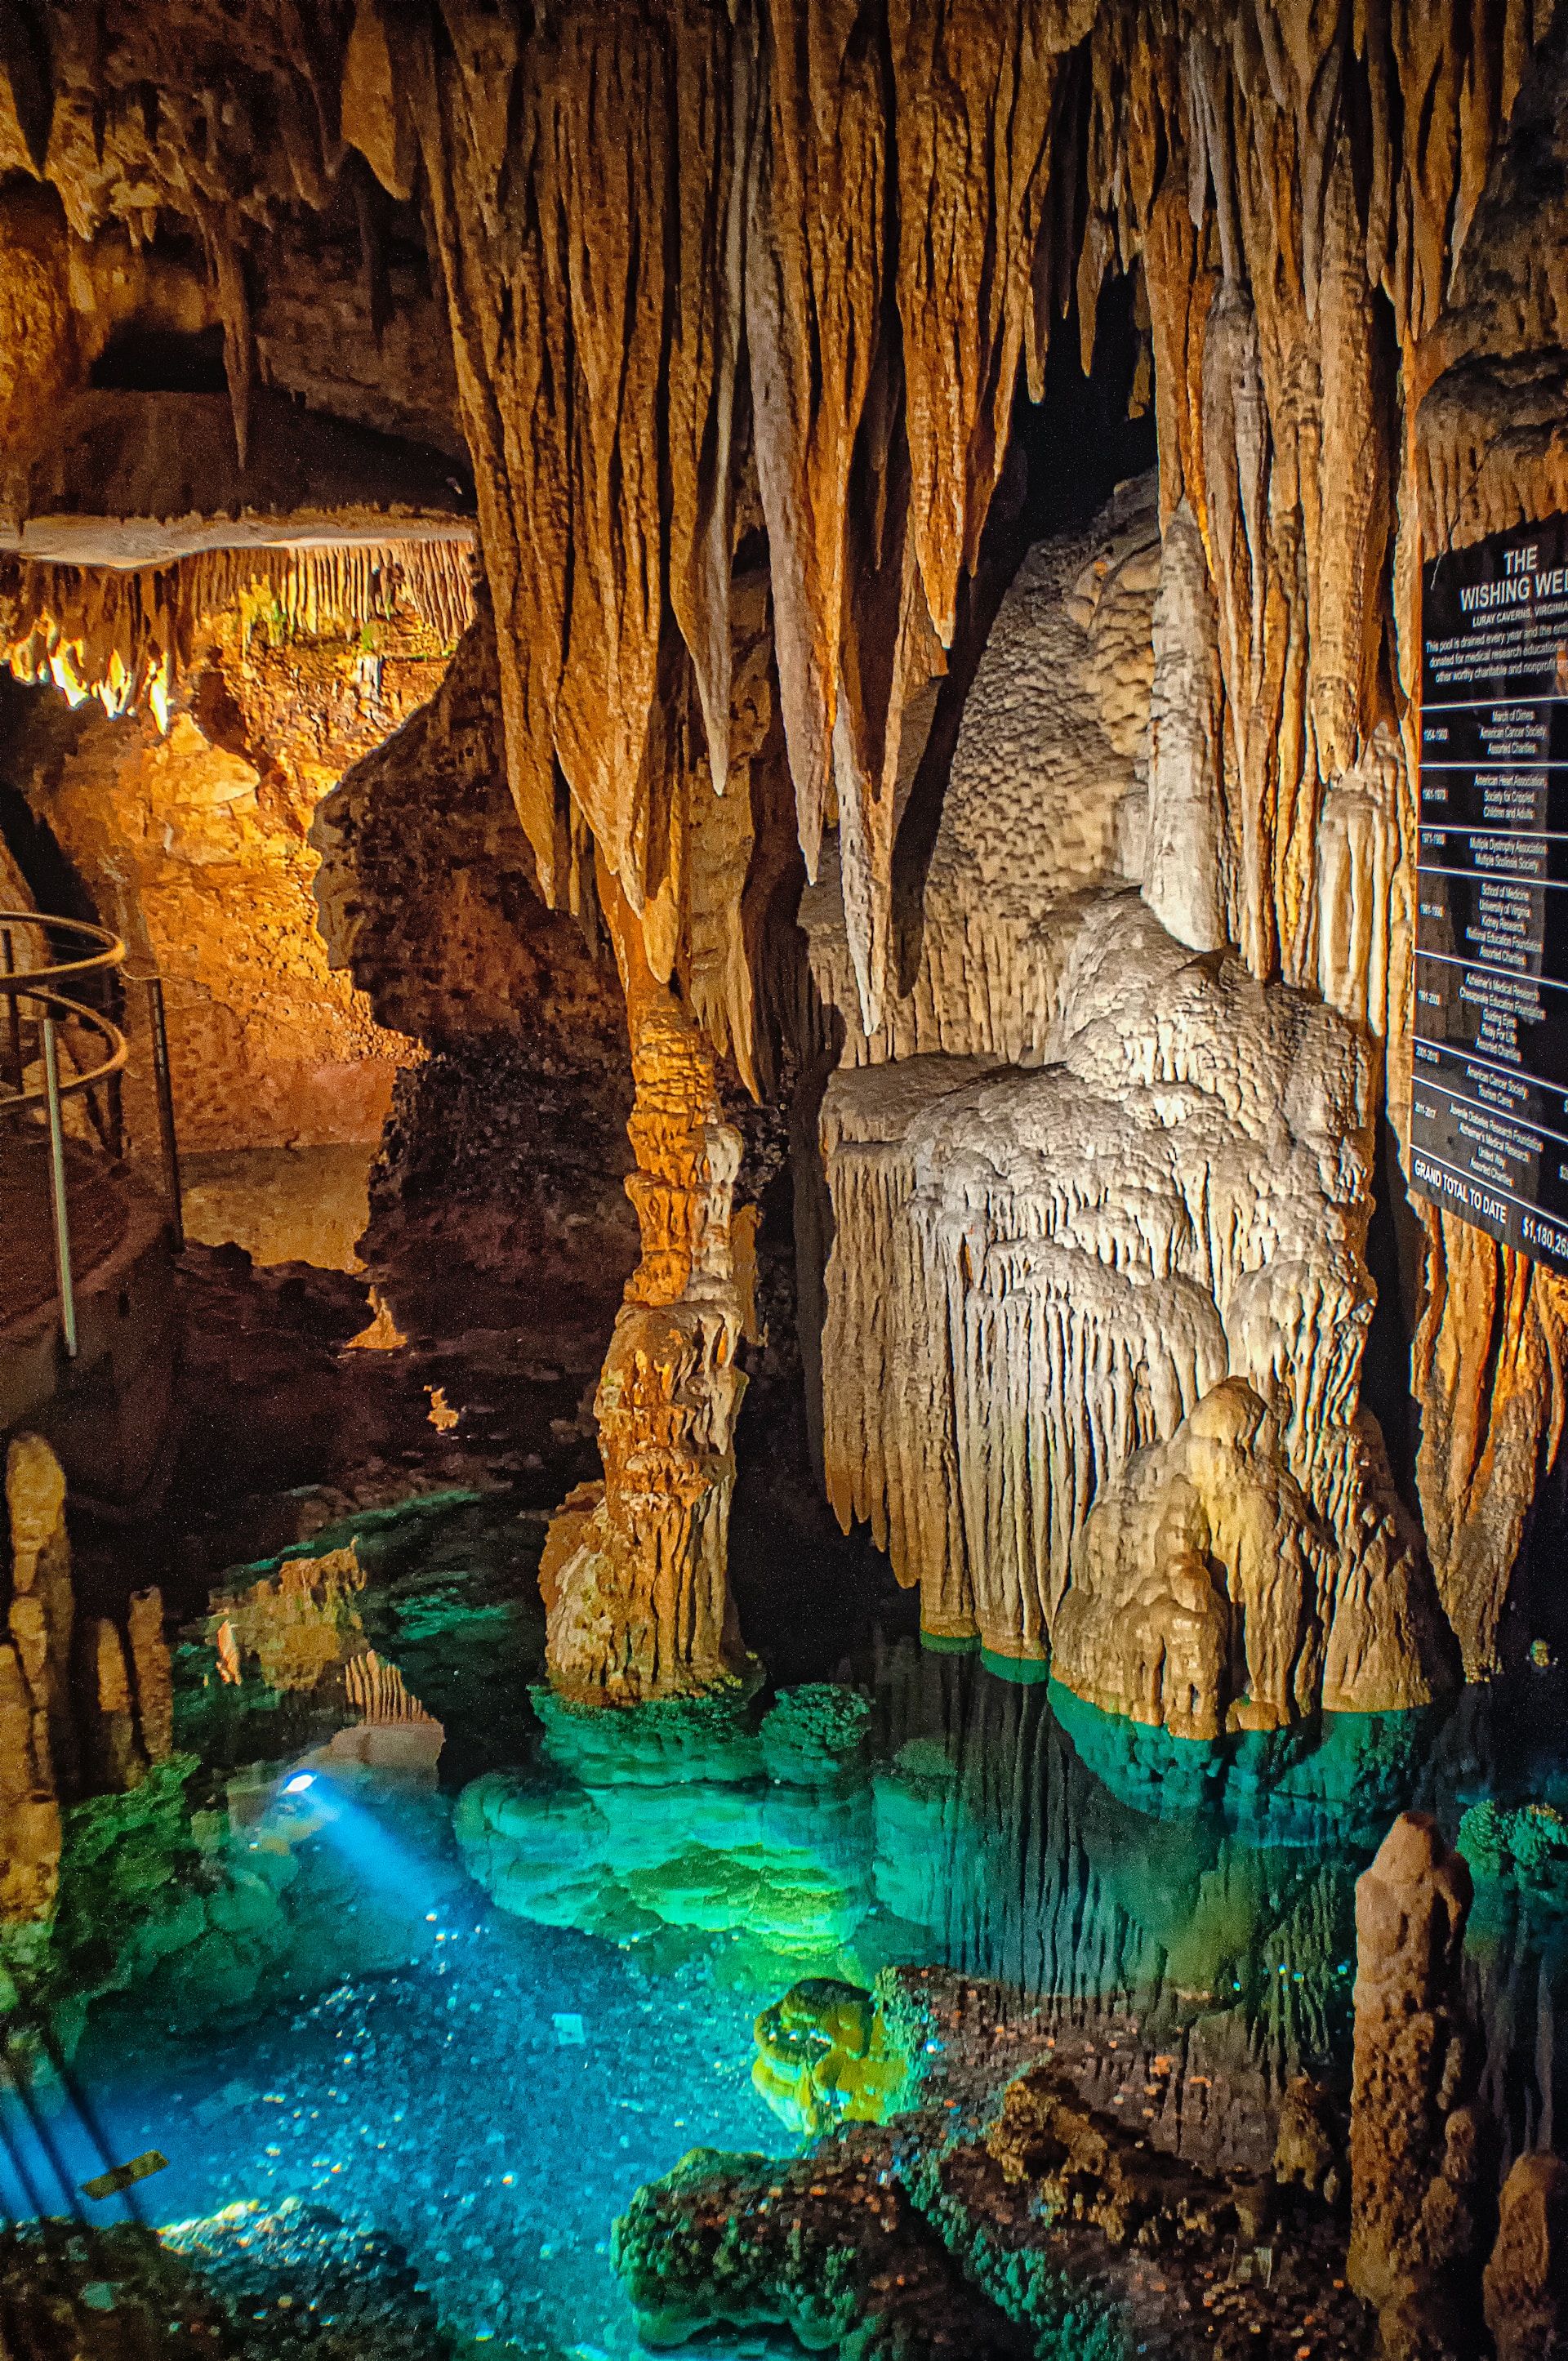 The wishing well in Luray Caverns